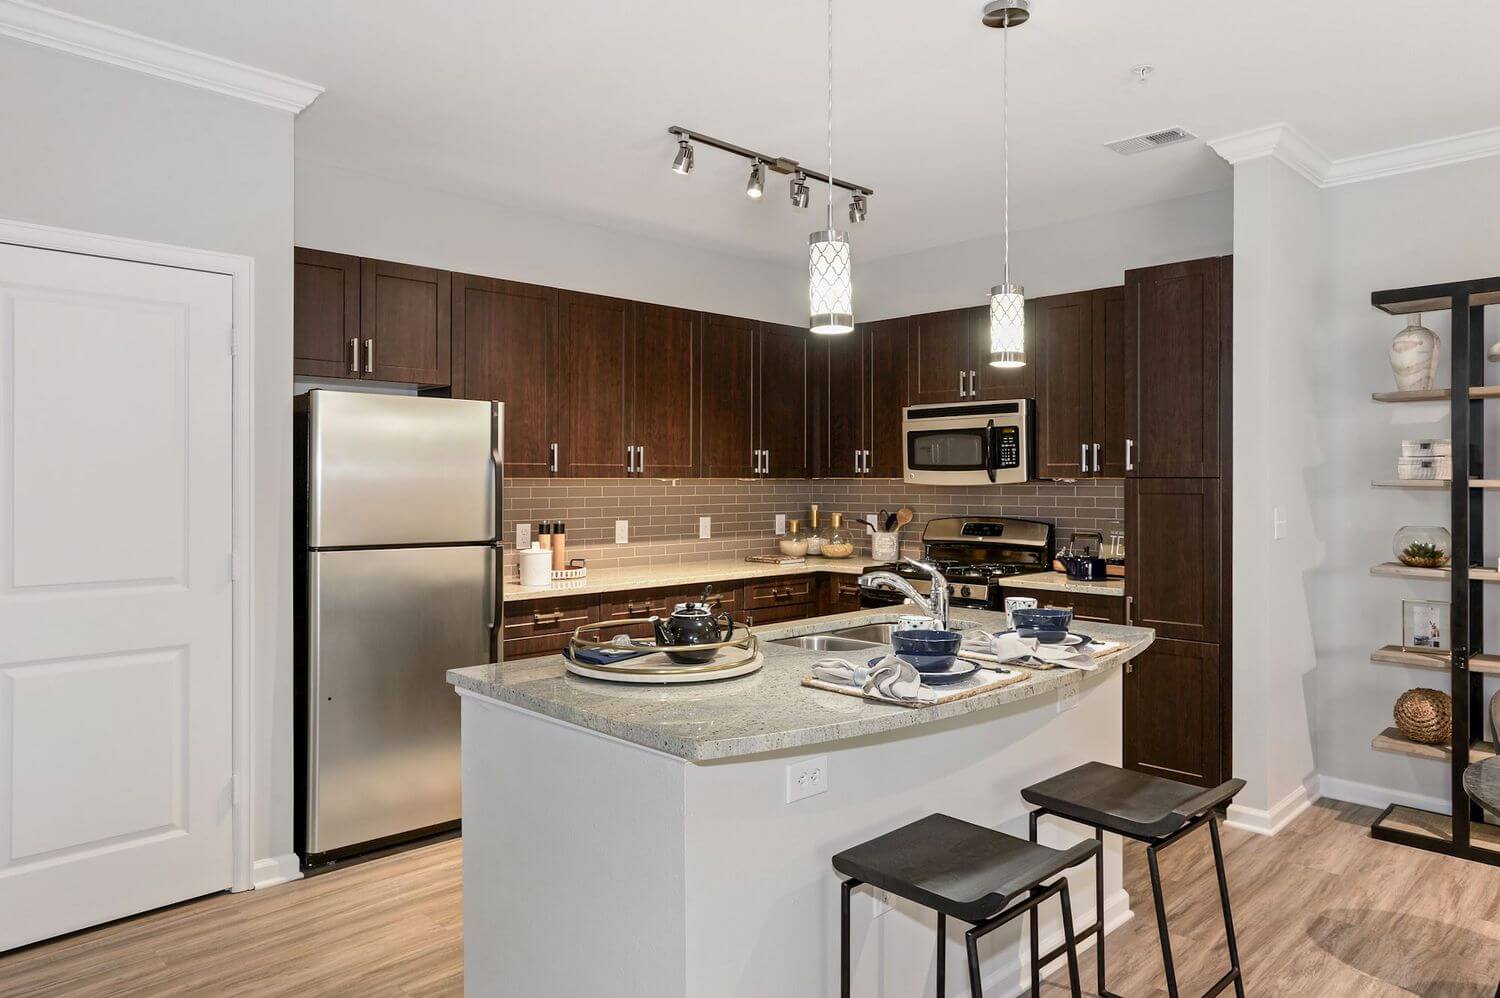 Enclave at Potomac Club Apartments : Your inner chef will adore the contemporary kitchen.